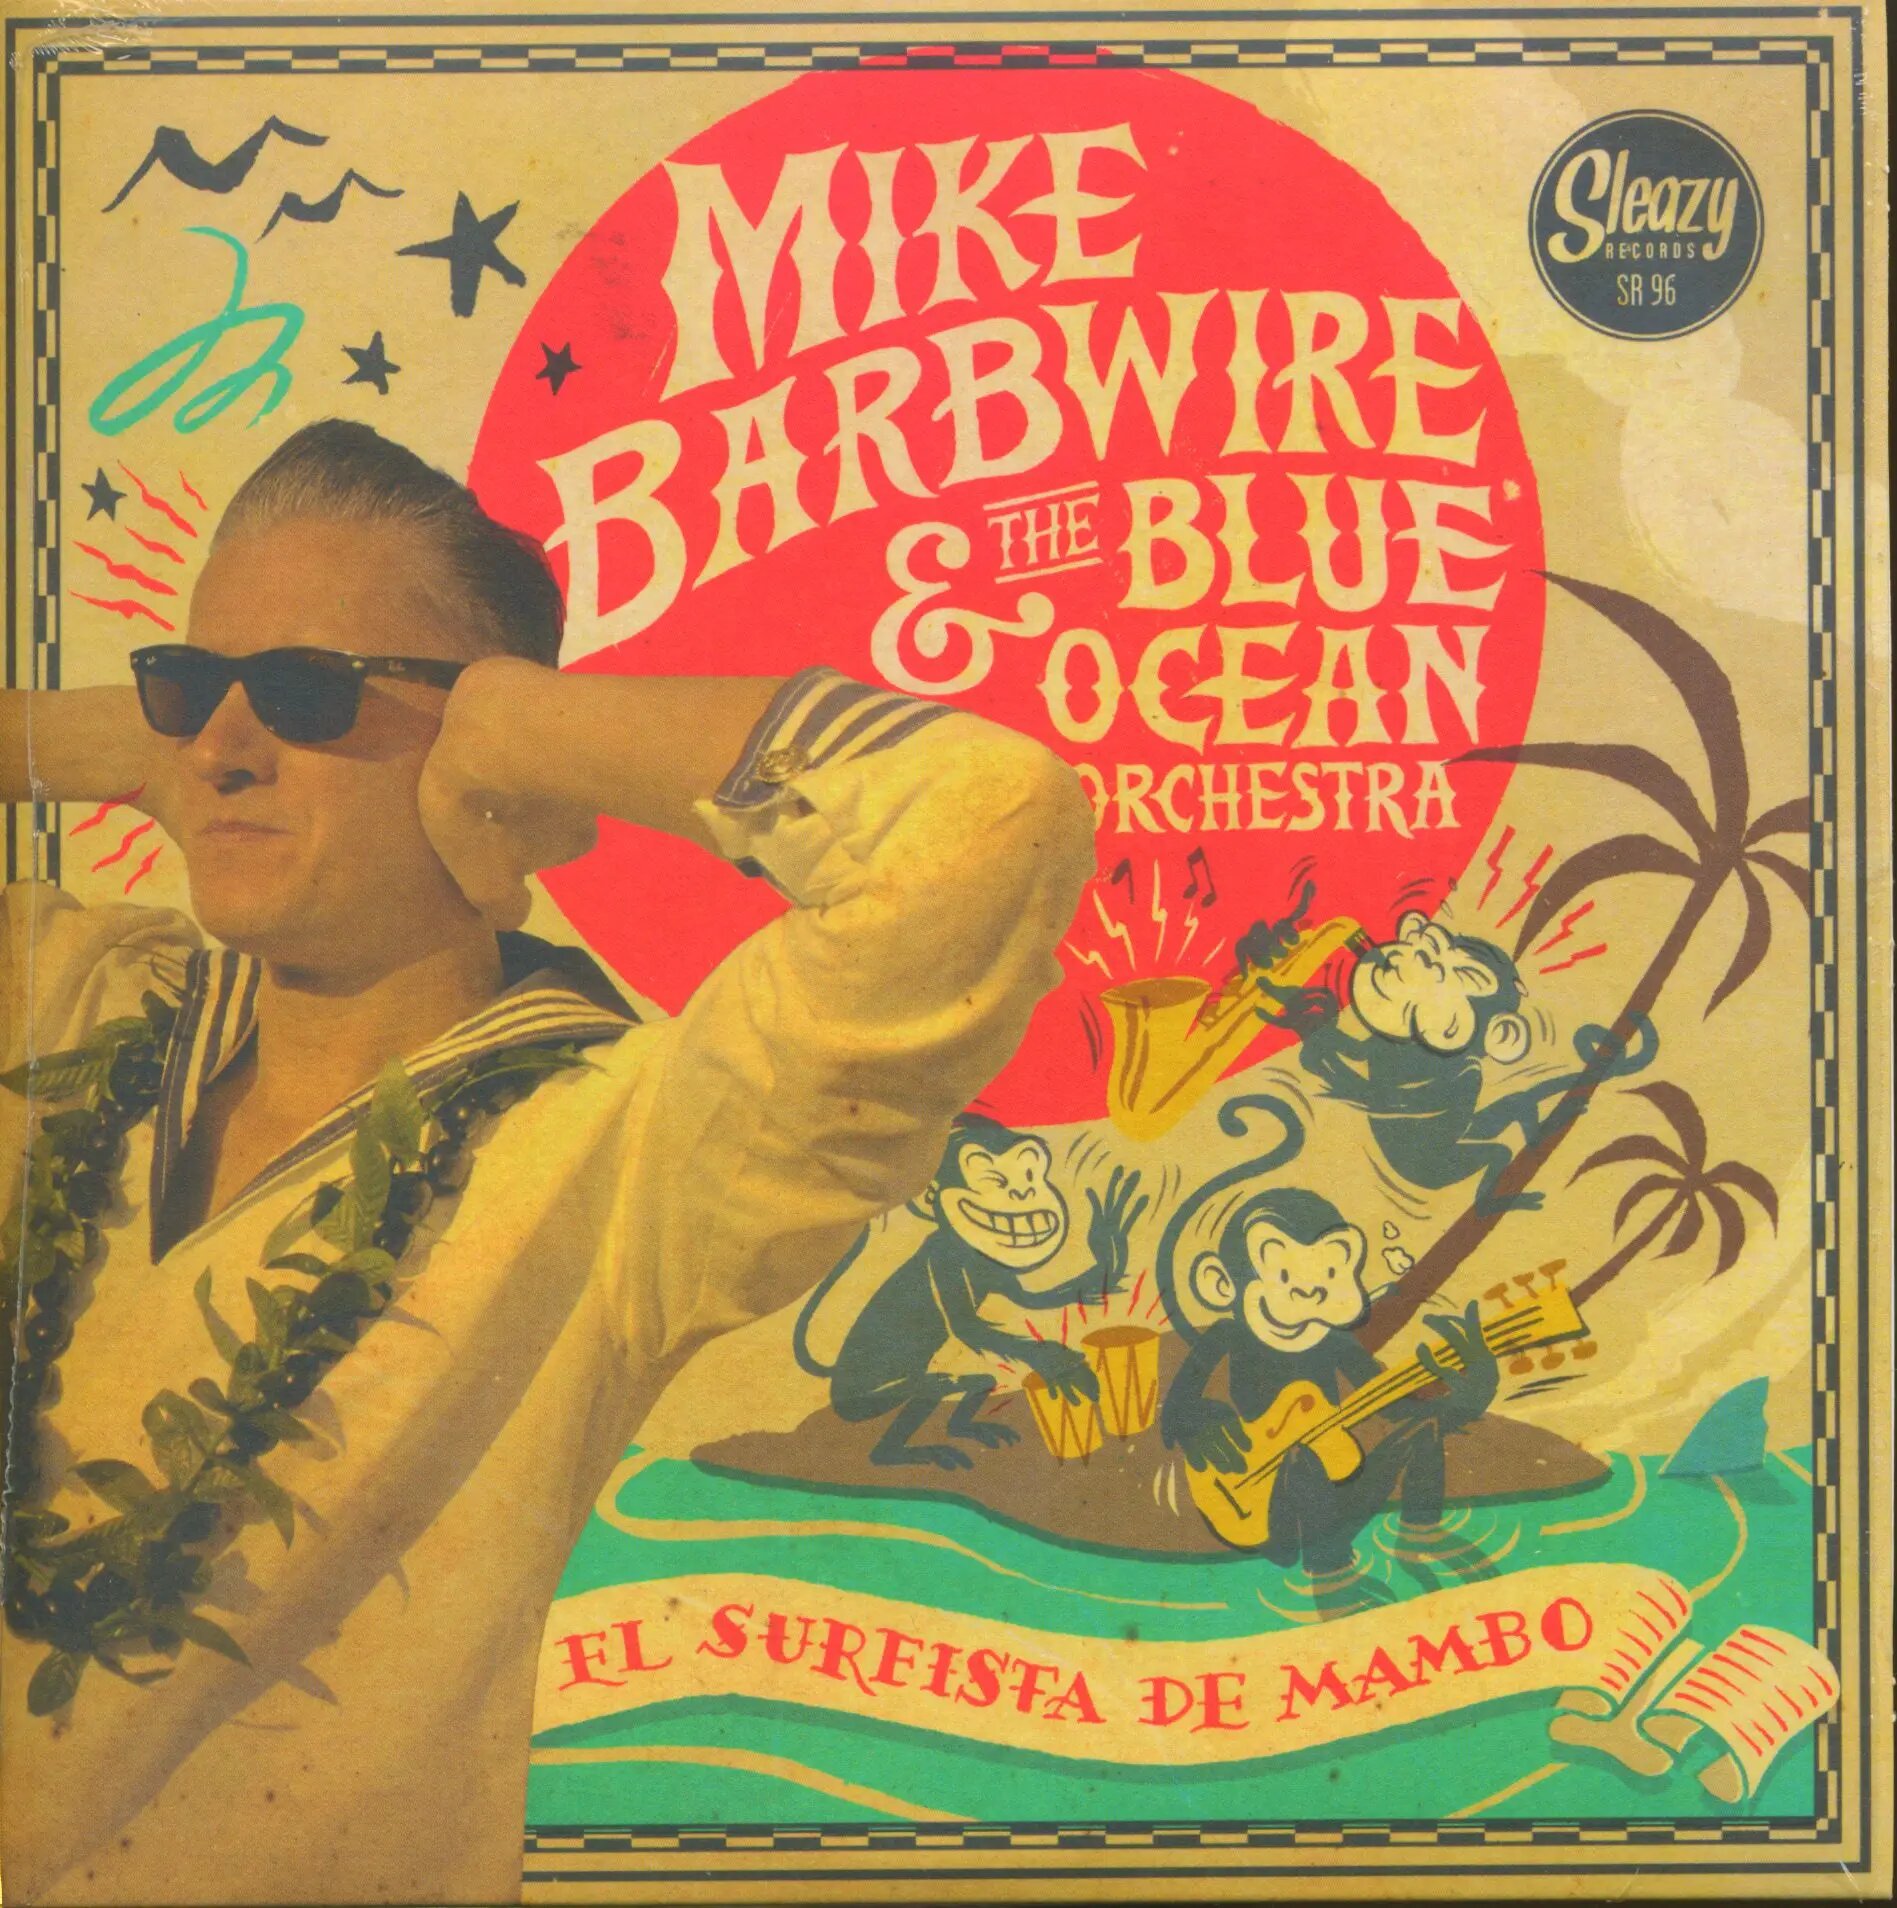 Mike-Barbwire---The-Blue-Ocean-O